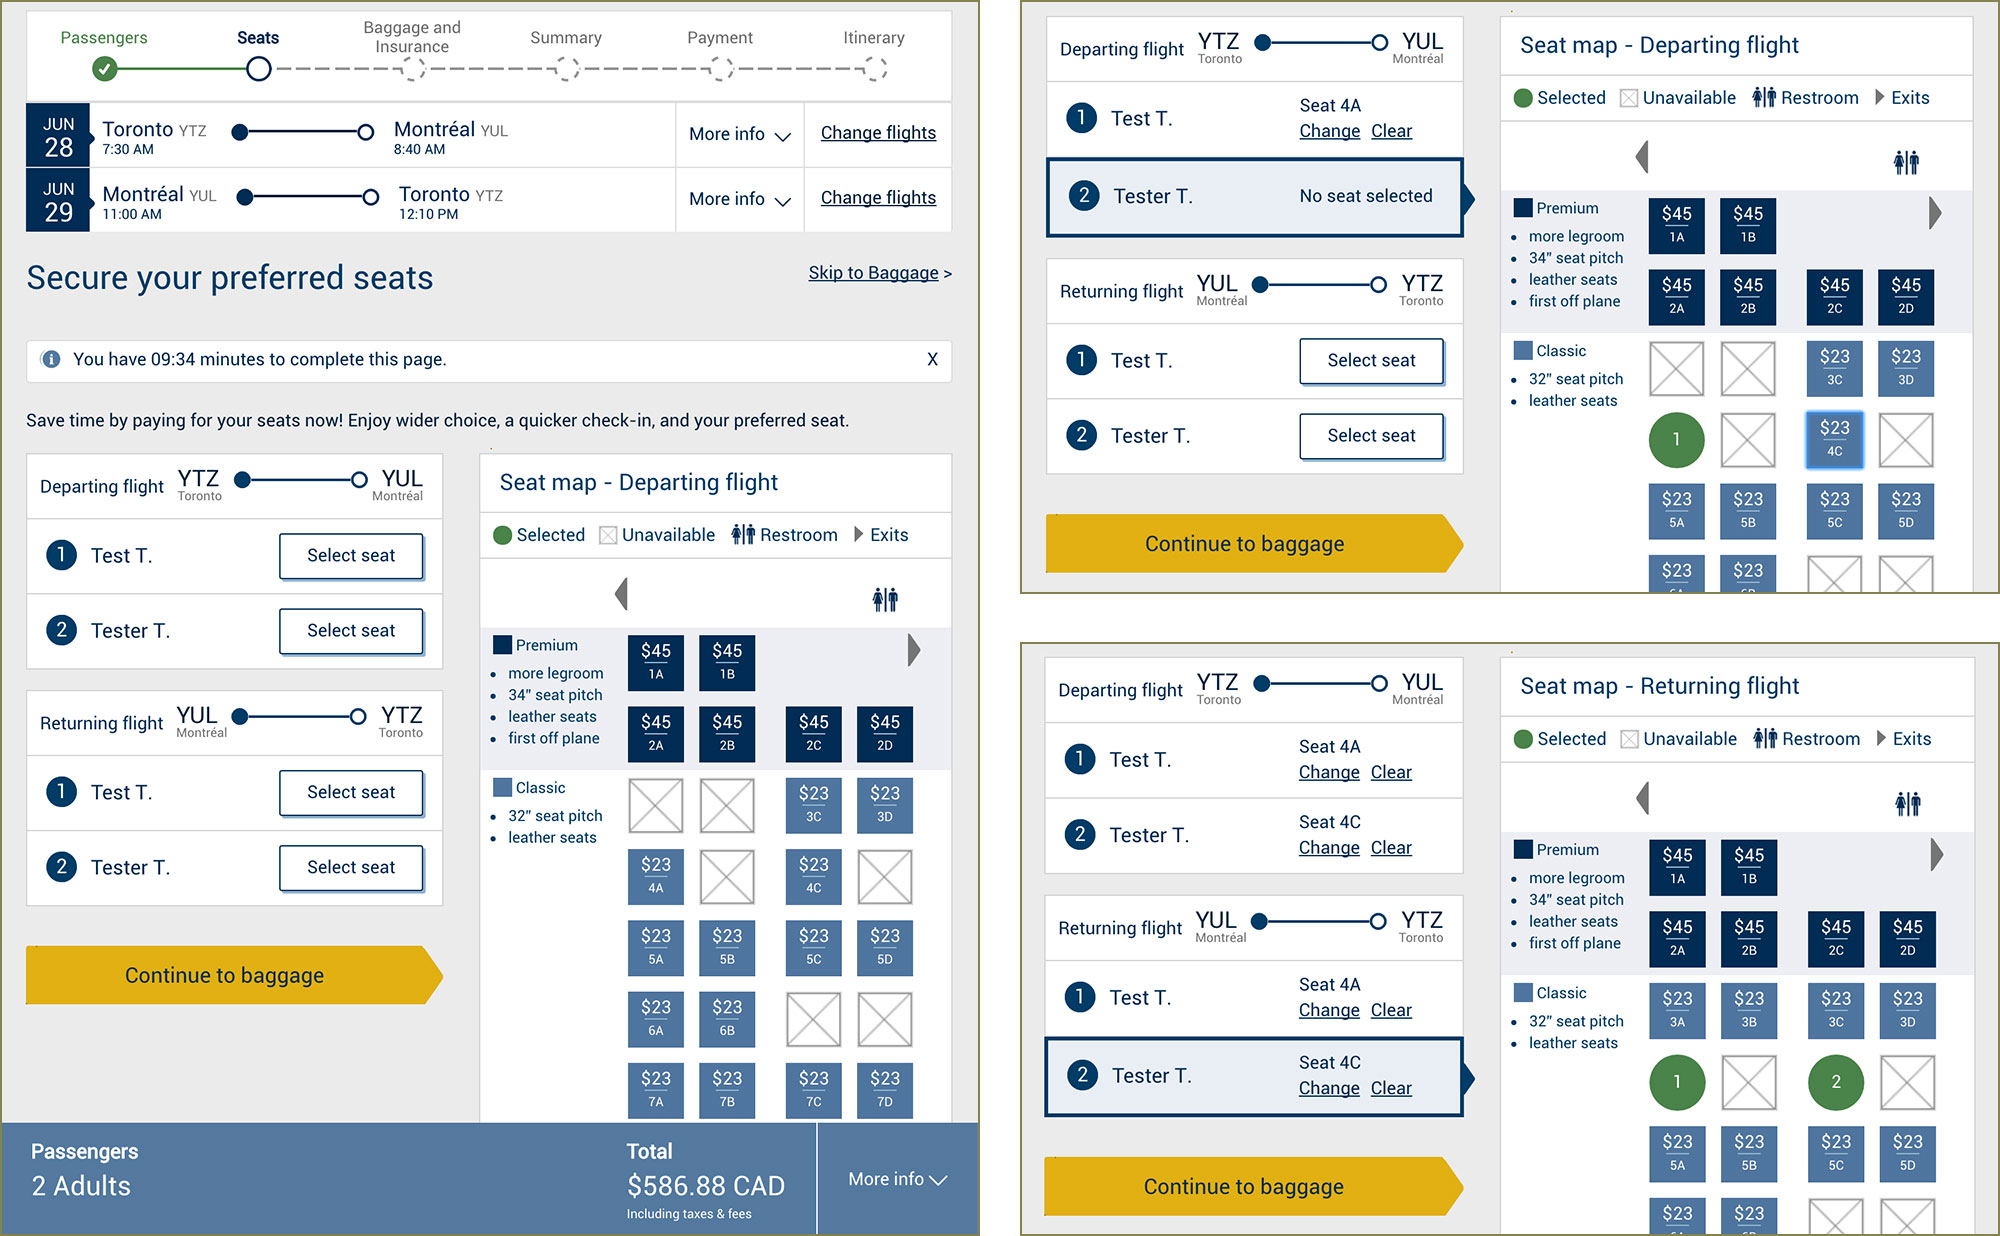 Screenshots of the revisions to the more accessible seat selection page based on findings from accessibility testing.